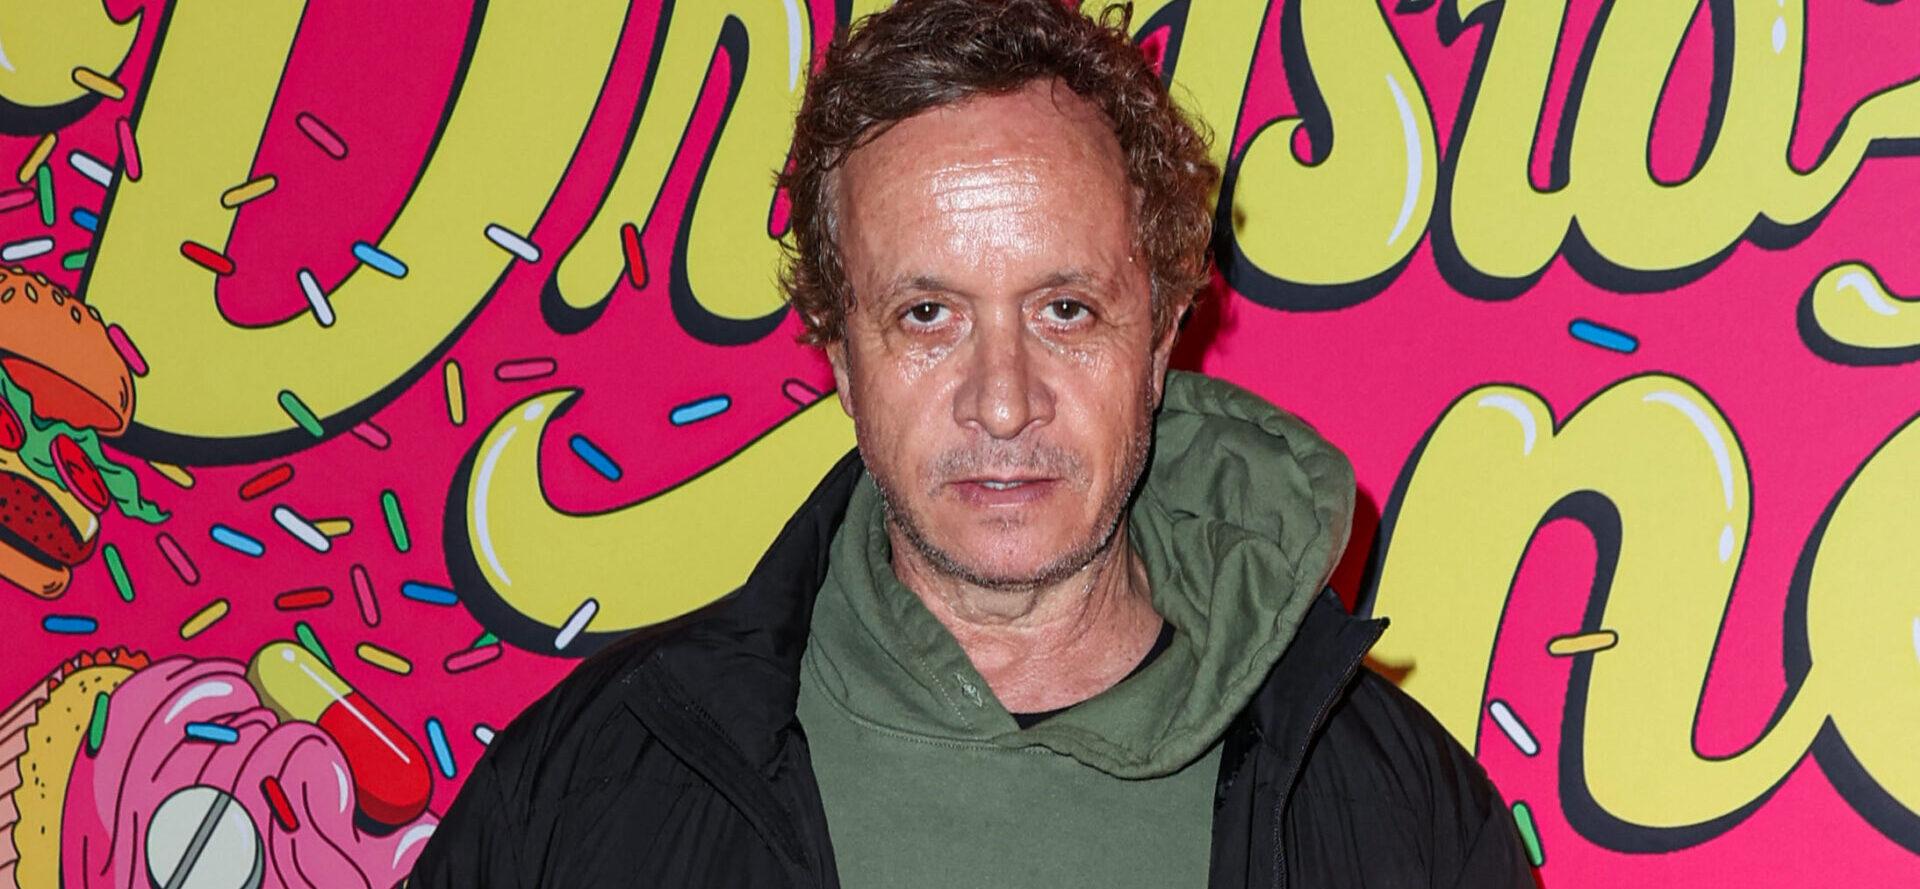 Pauly Shore Sued Again For Violent Assault At The Comedy Store